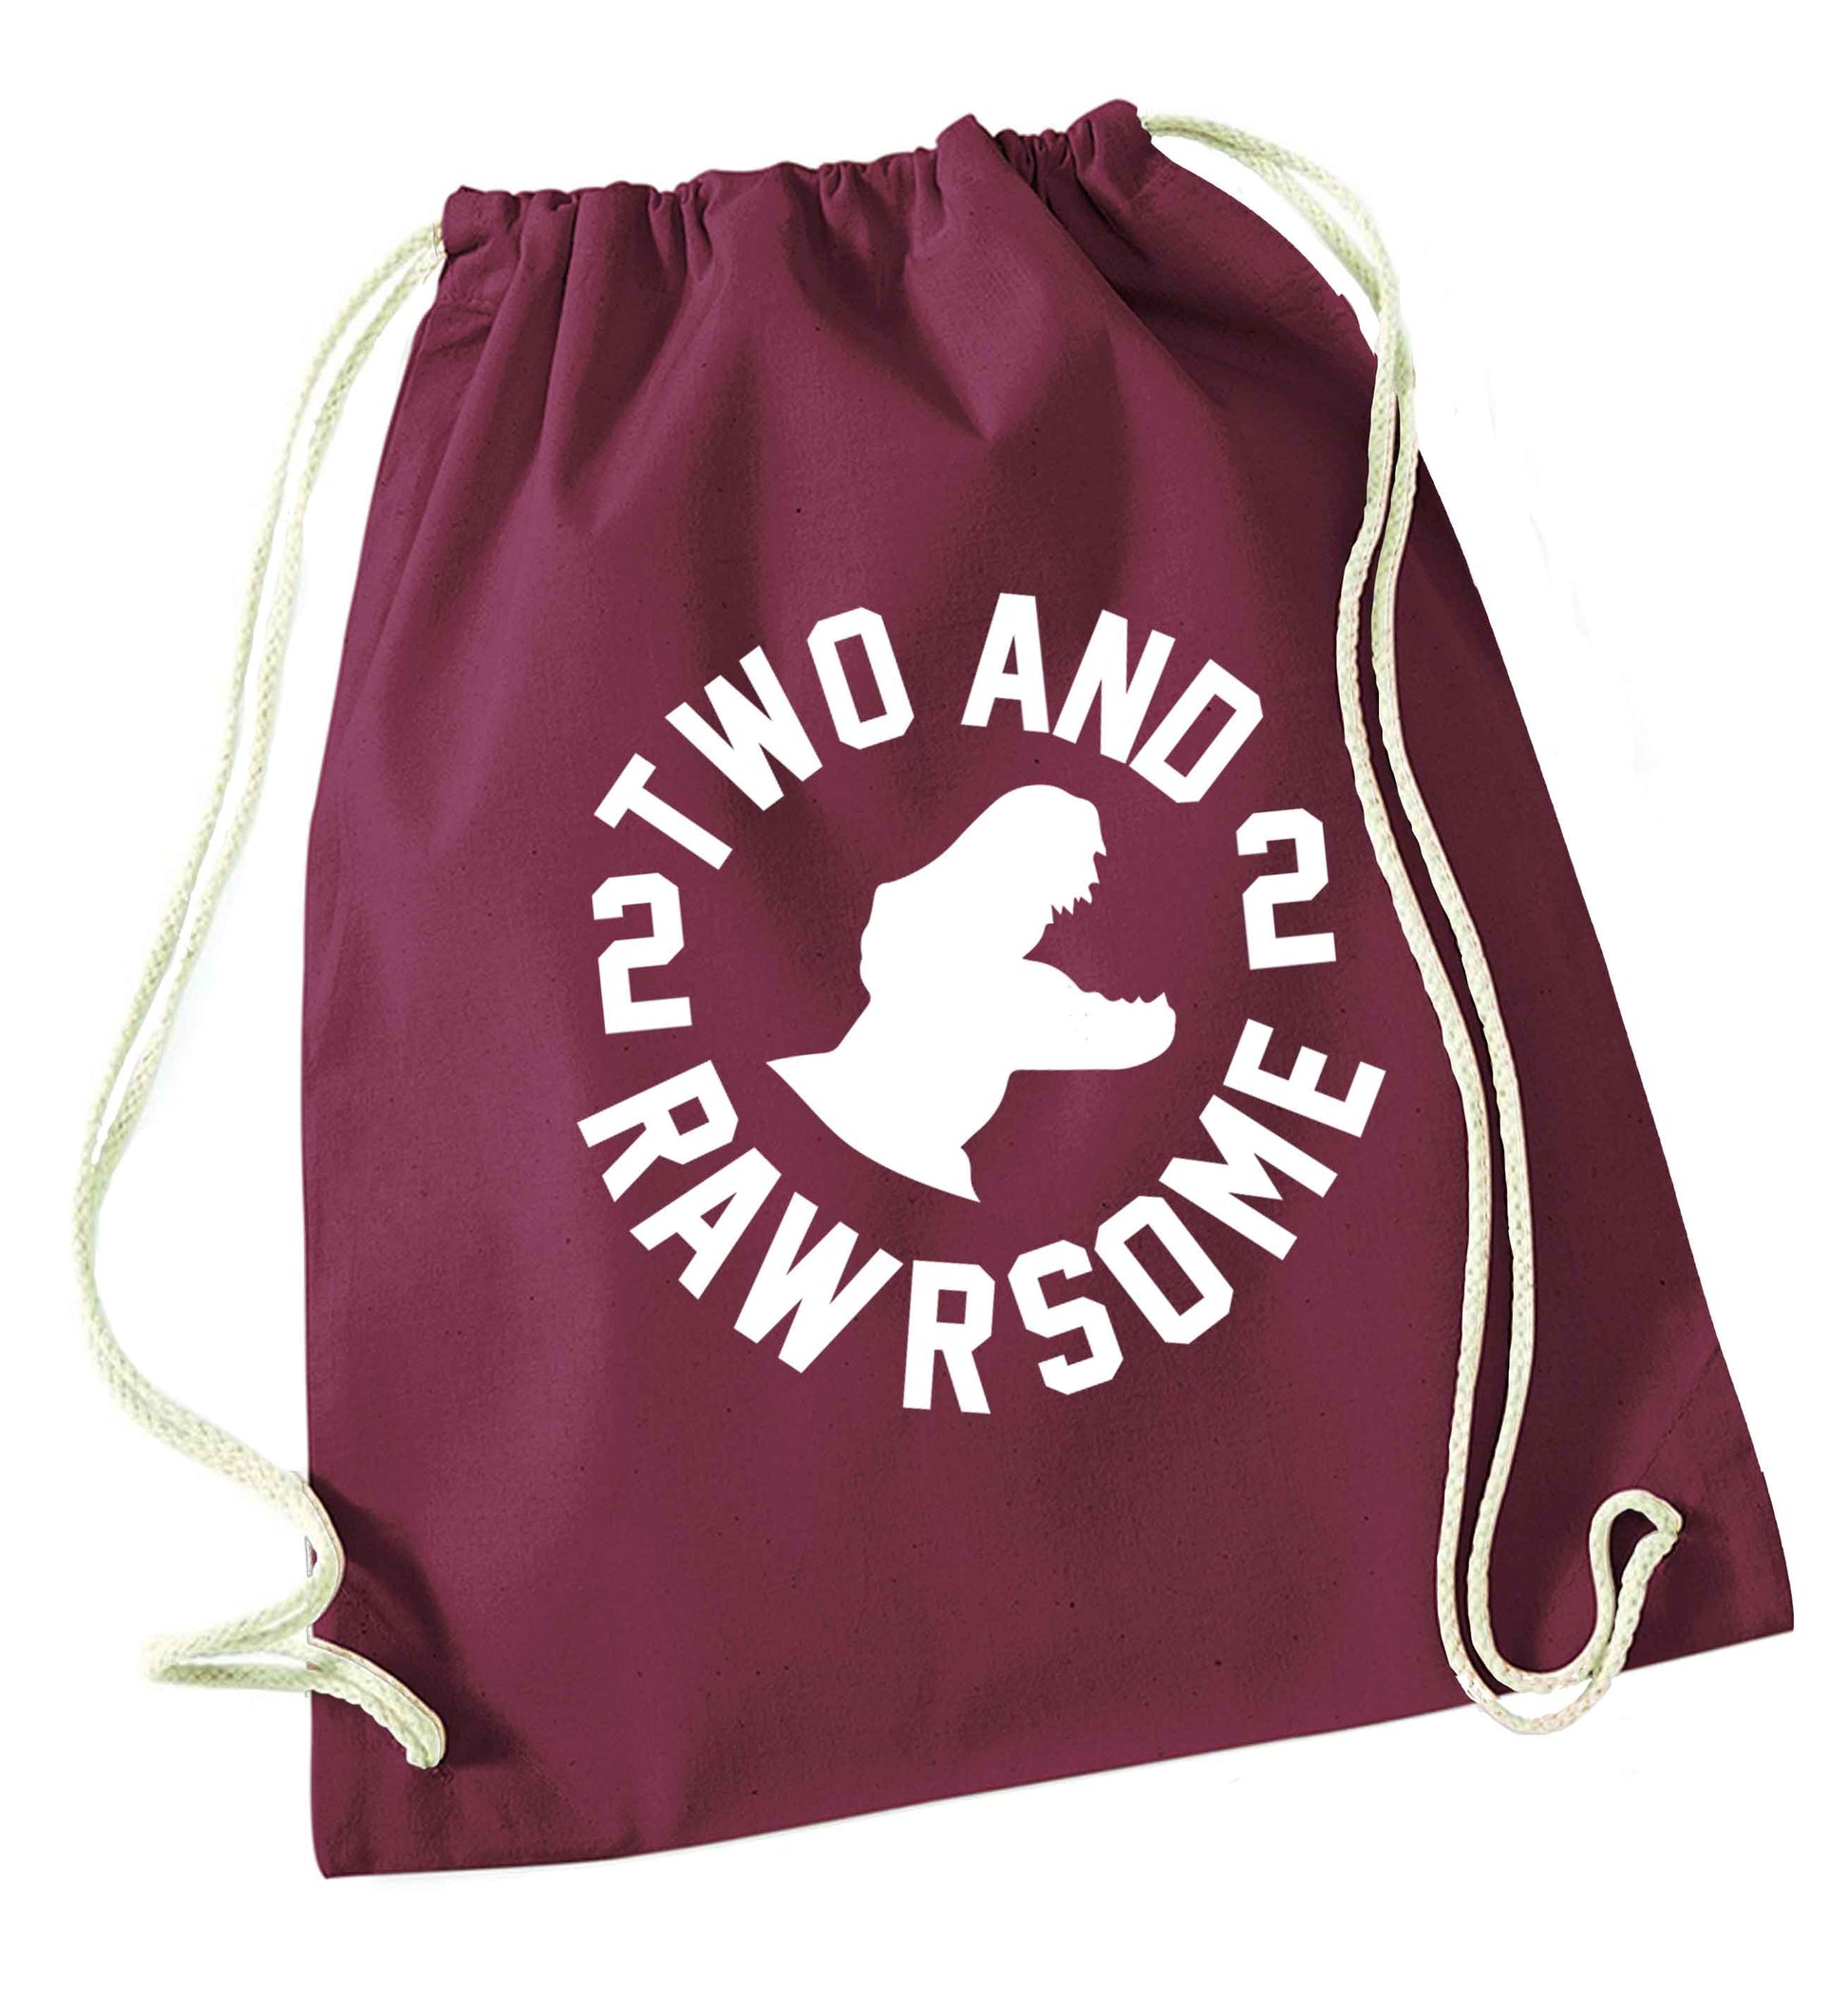 Two and rawrsome maroon drawstring bag